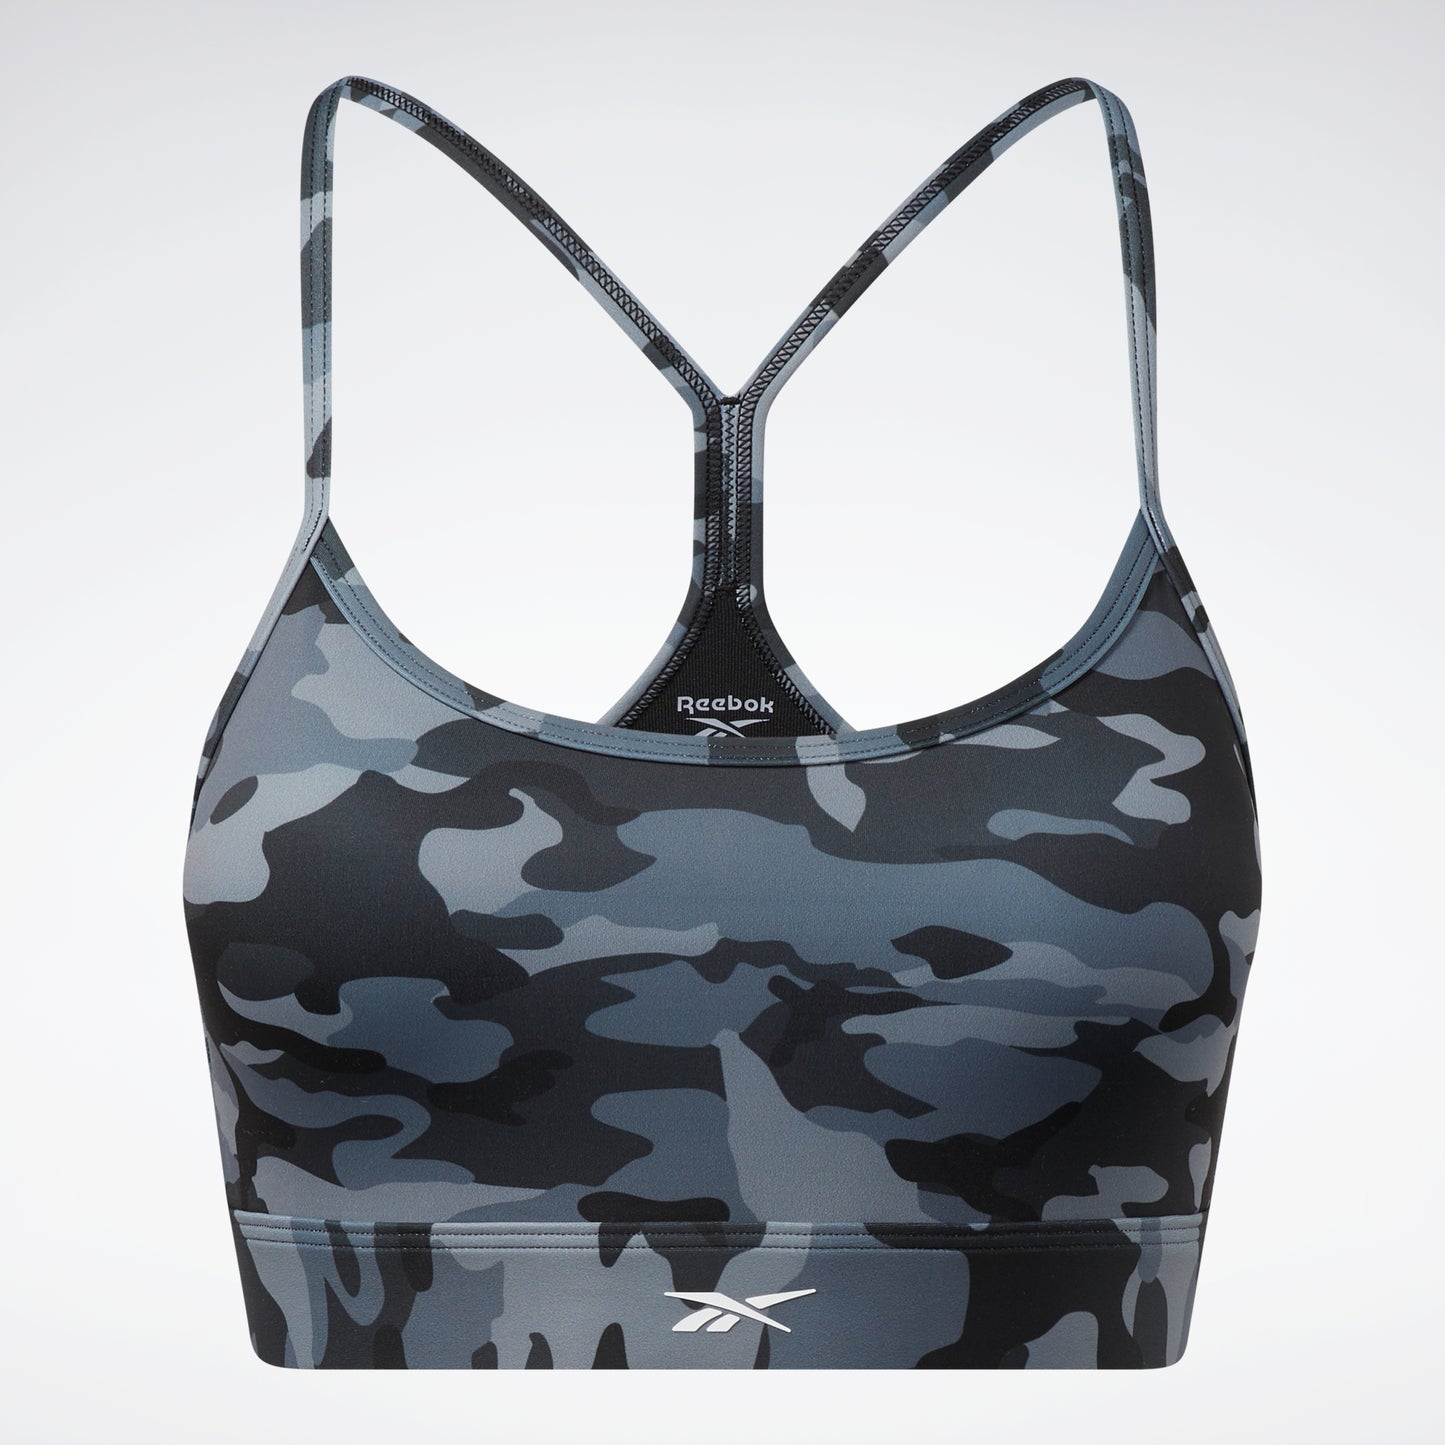 Knitted Women Sports Bra Tank Top Camo Comfy Sporty Camouflage